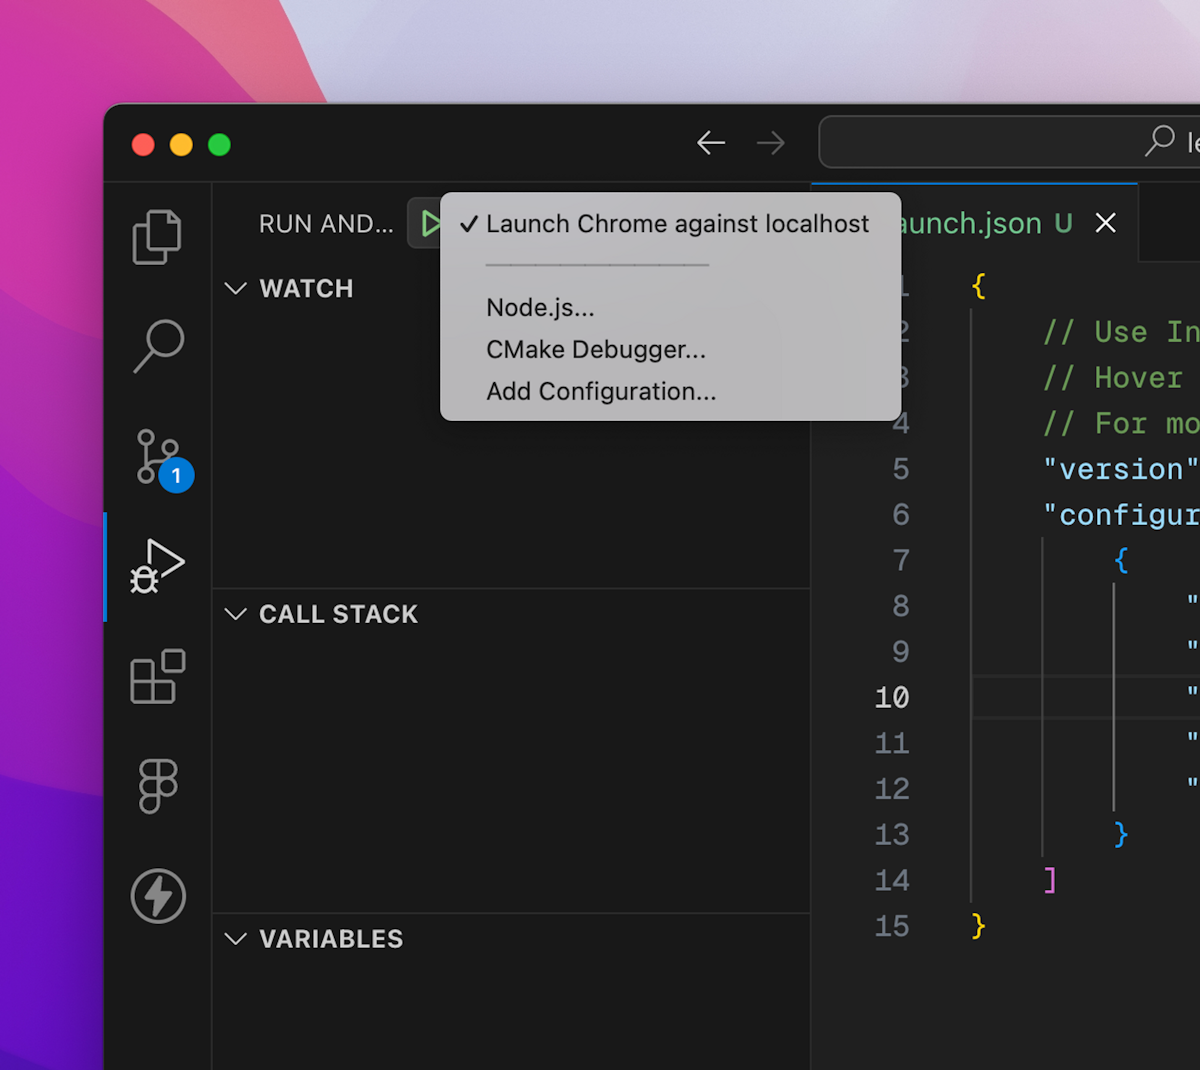 VSCode Debugger comes built-in with VSCode and if used correctly will save you a ton of time. But sadly, a lot of people aren't familiar with it.